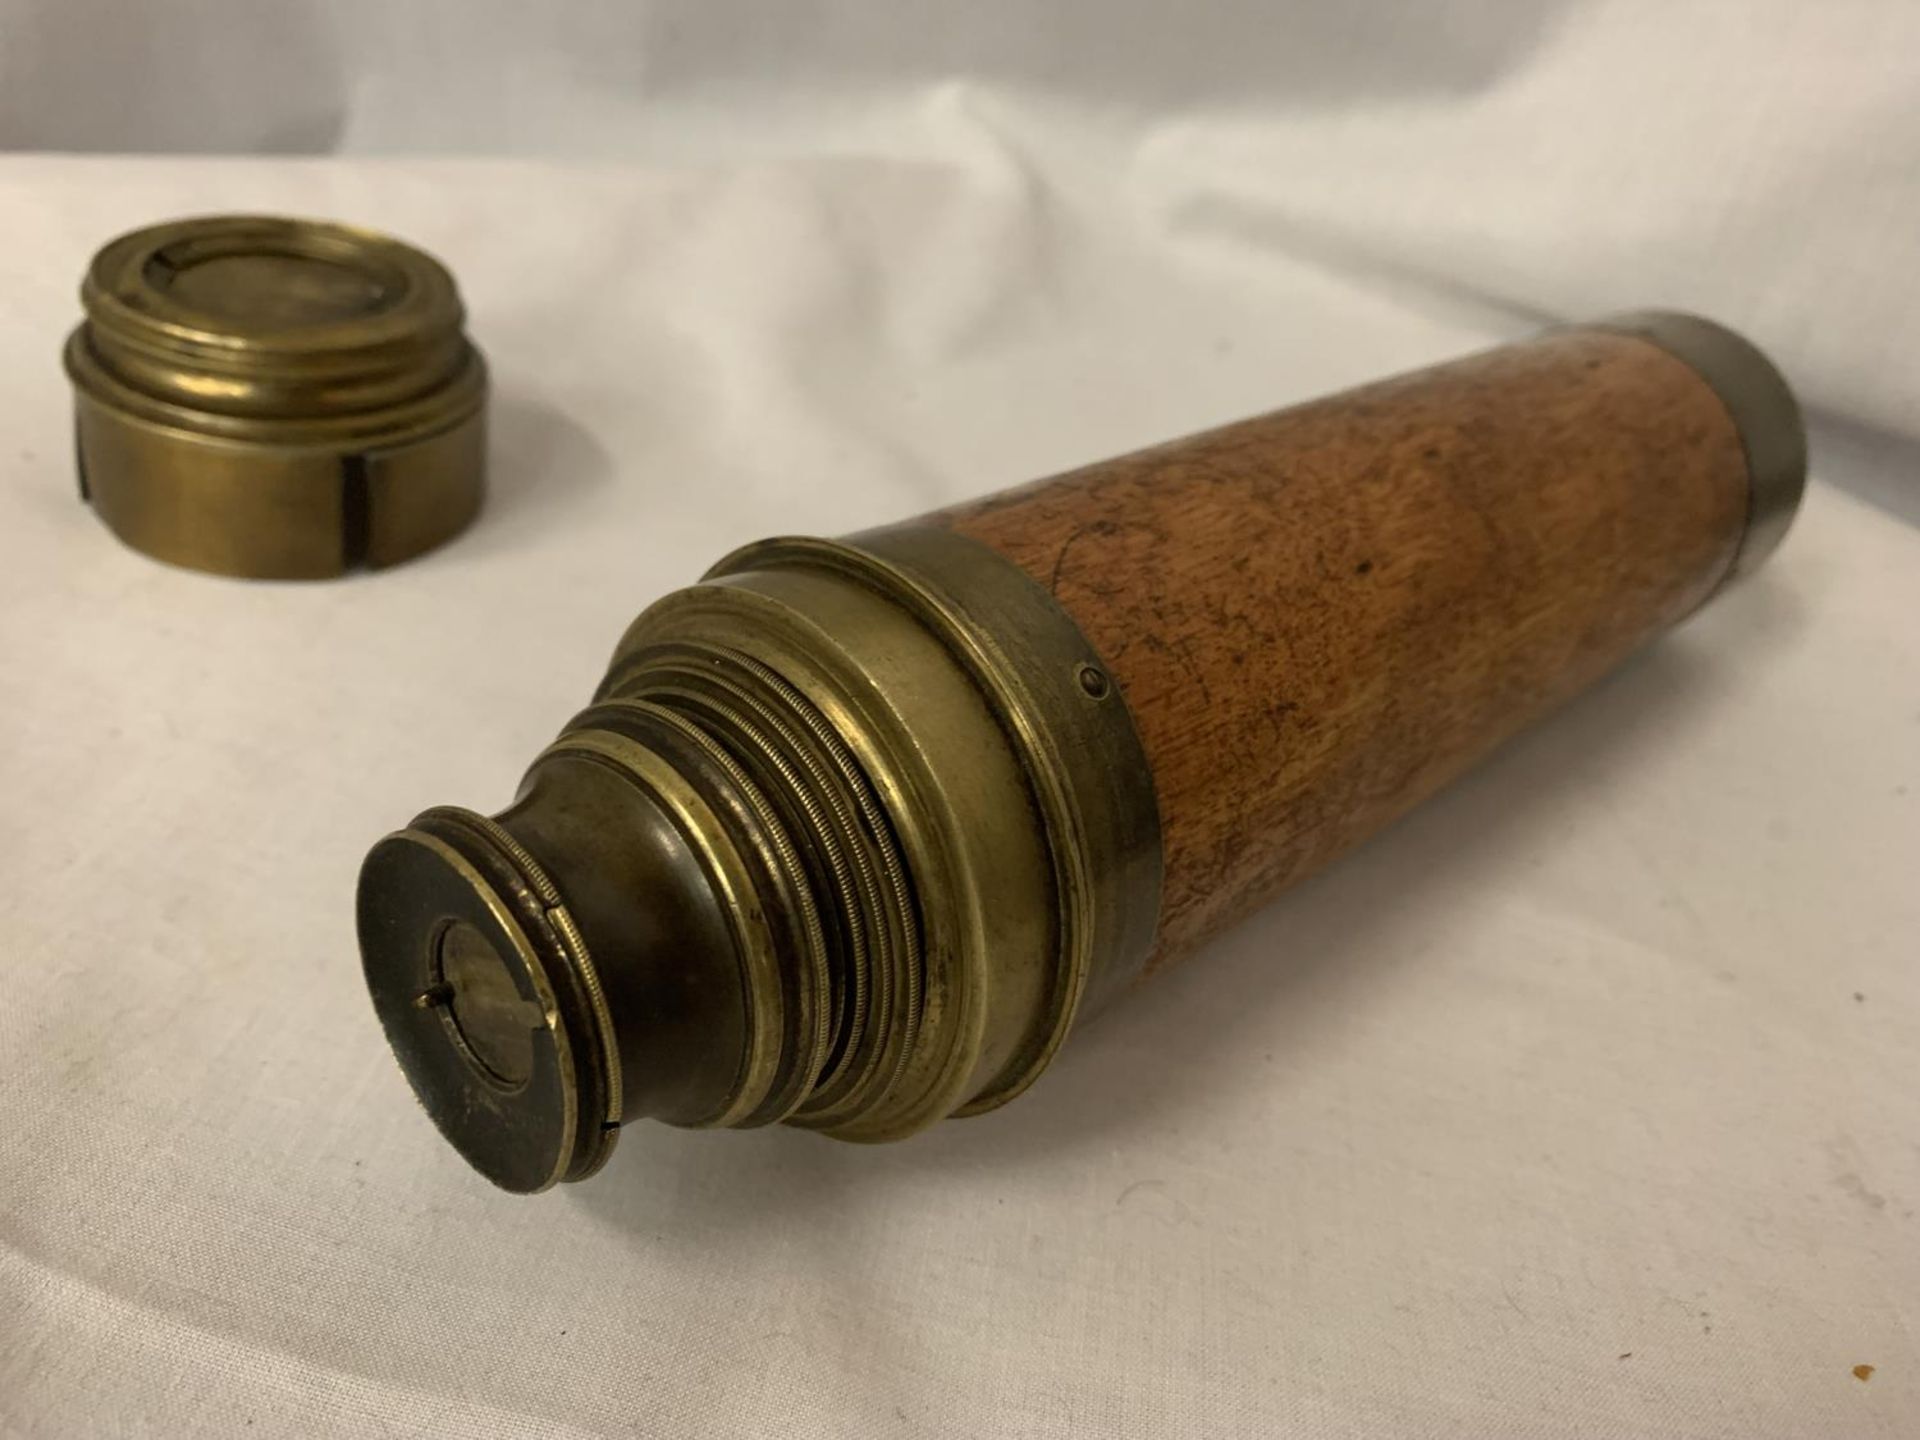 A VINTAGE BRASS AND WOOD TELESCOPE - Image 4 of 4